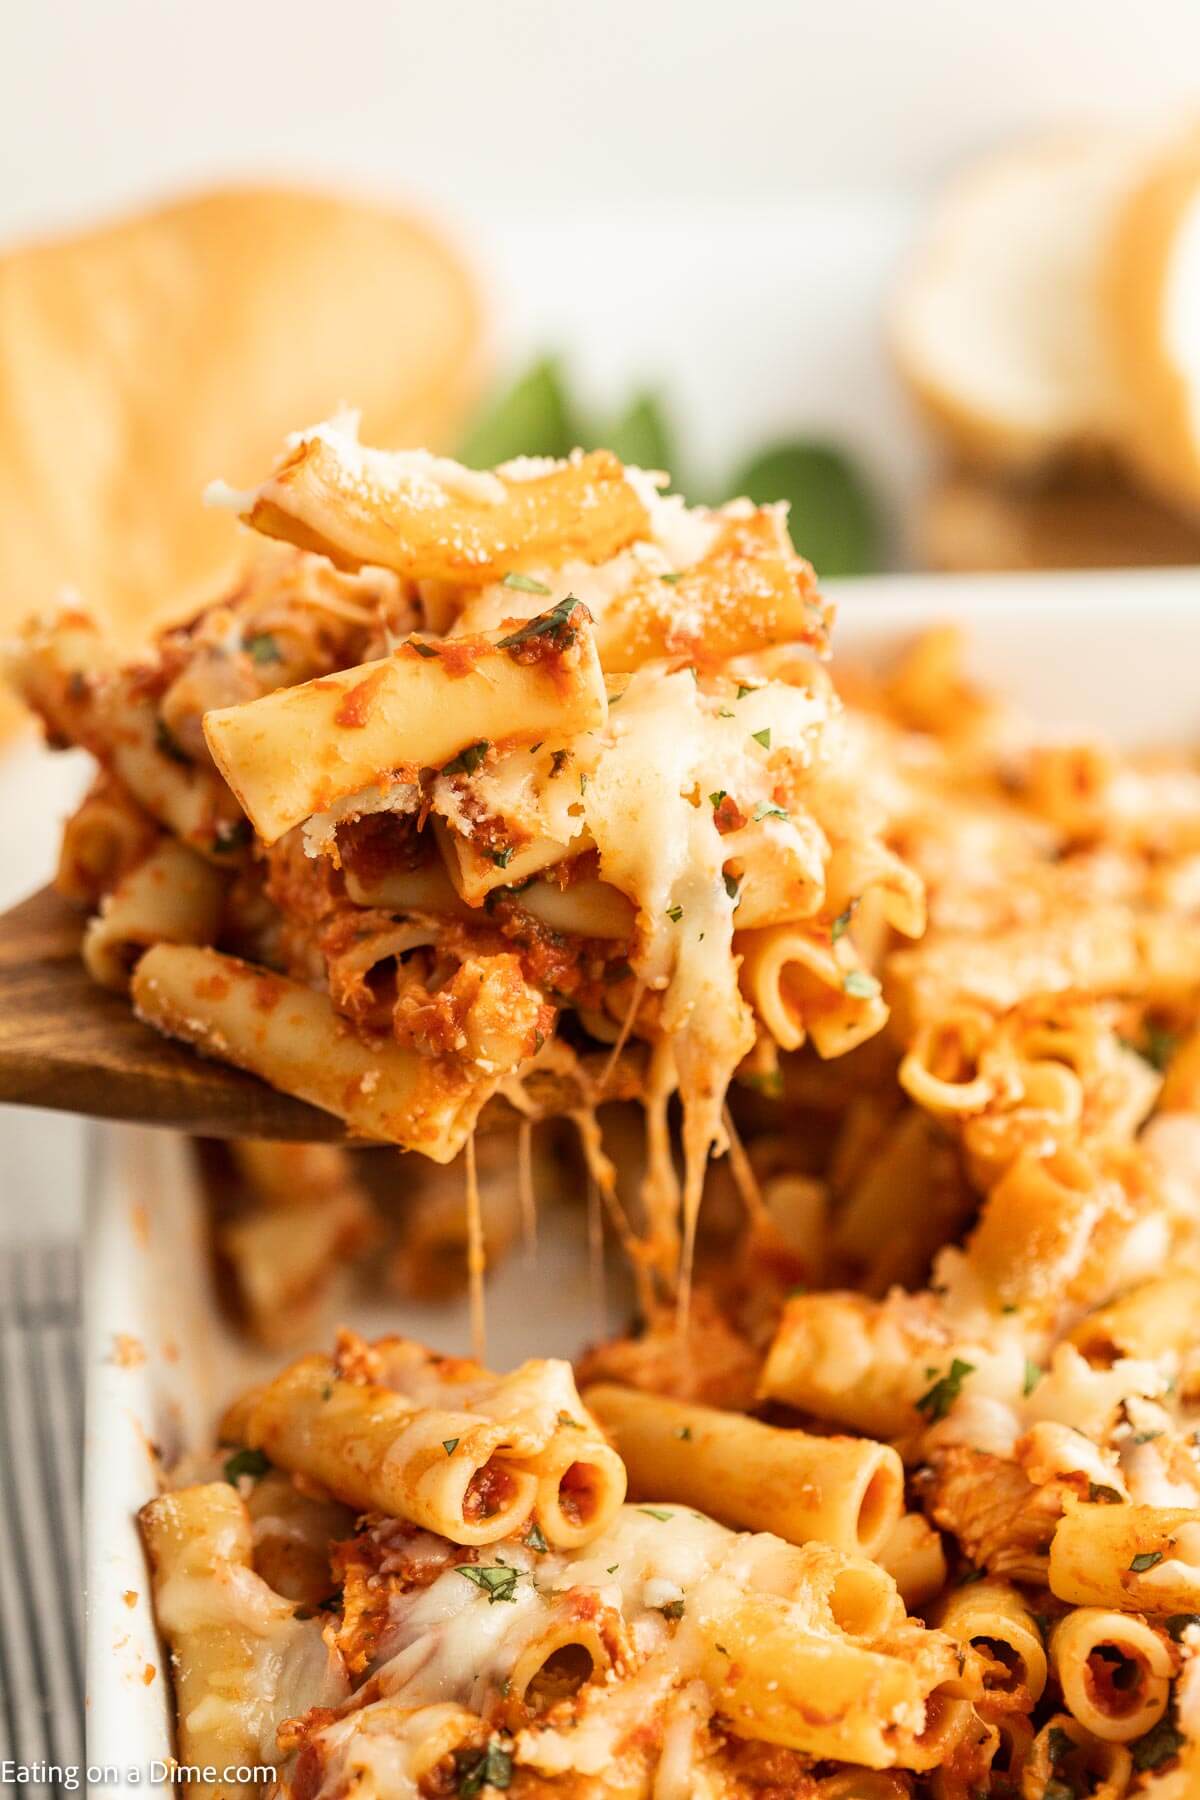 Baked Ziti in a casserole dish with a serving on a wooden spoon